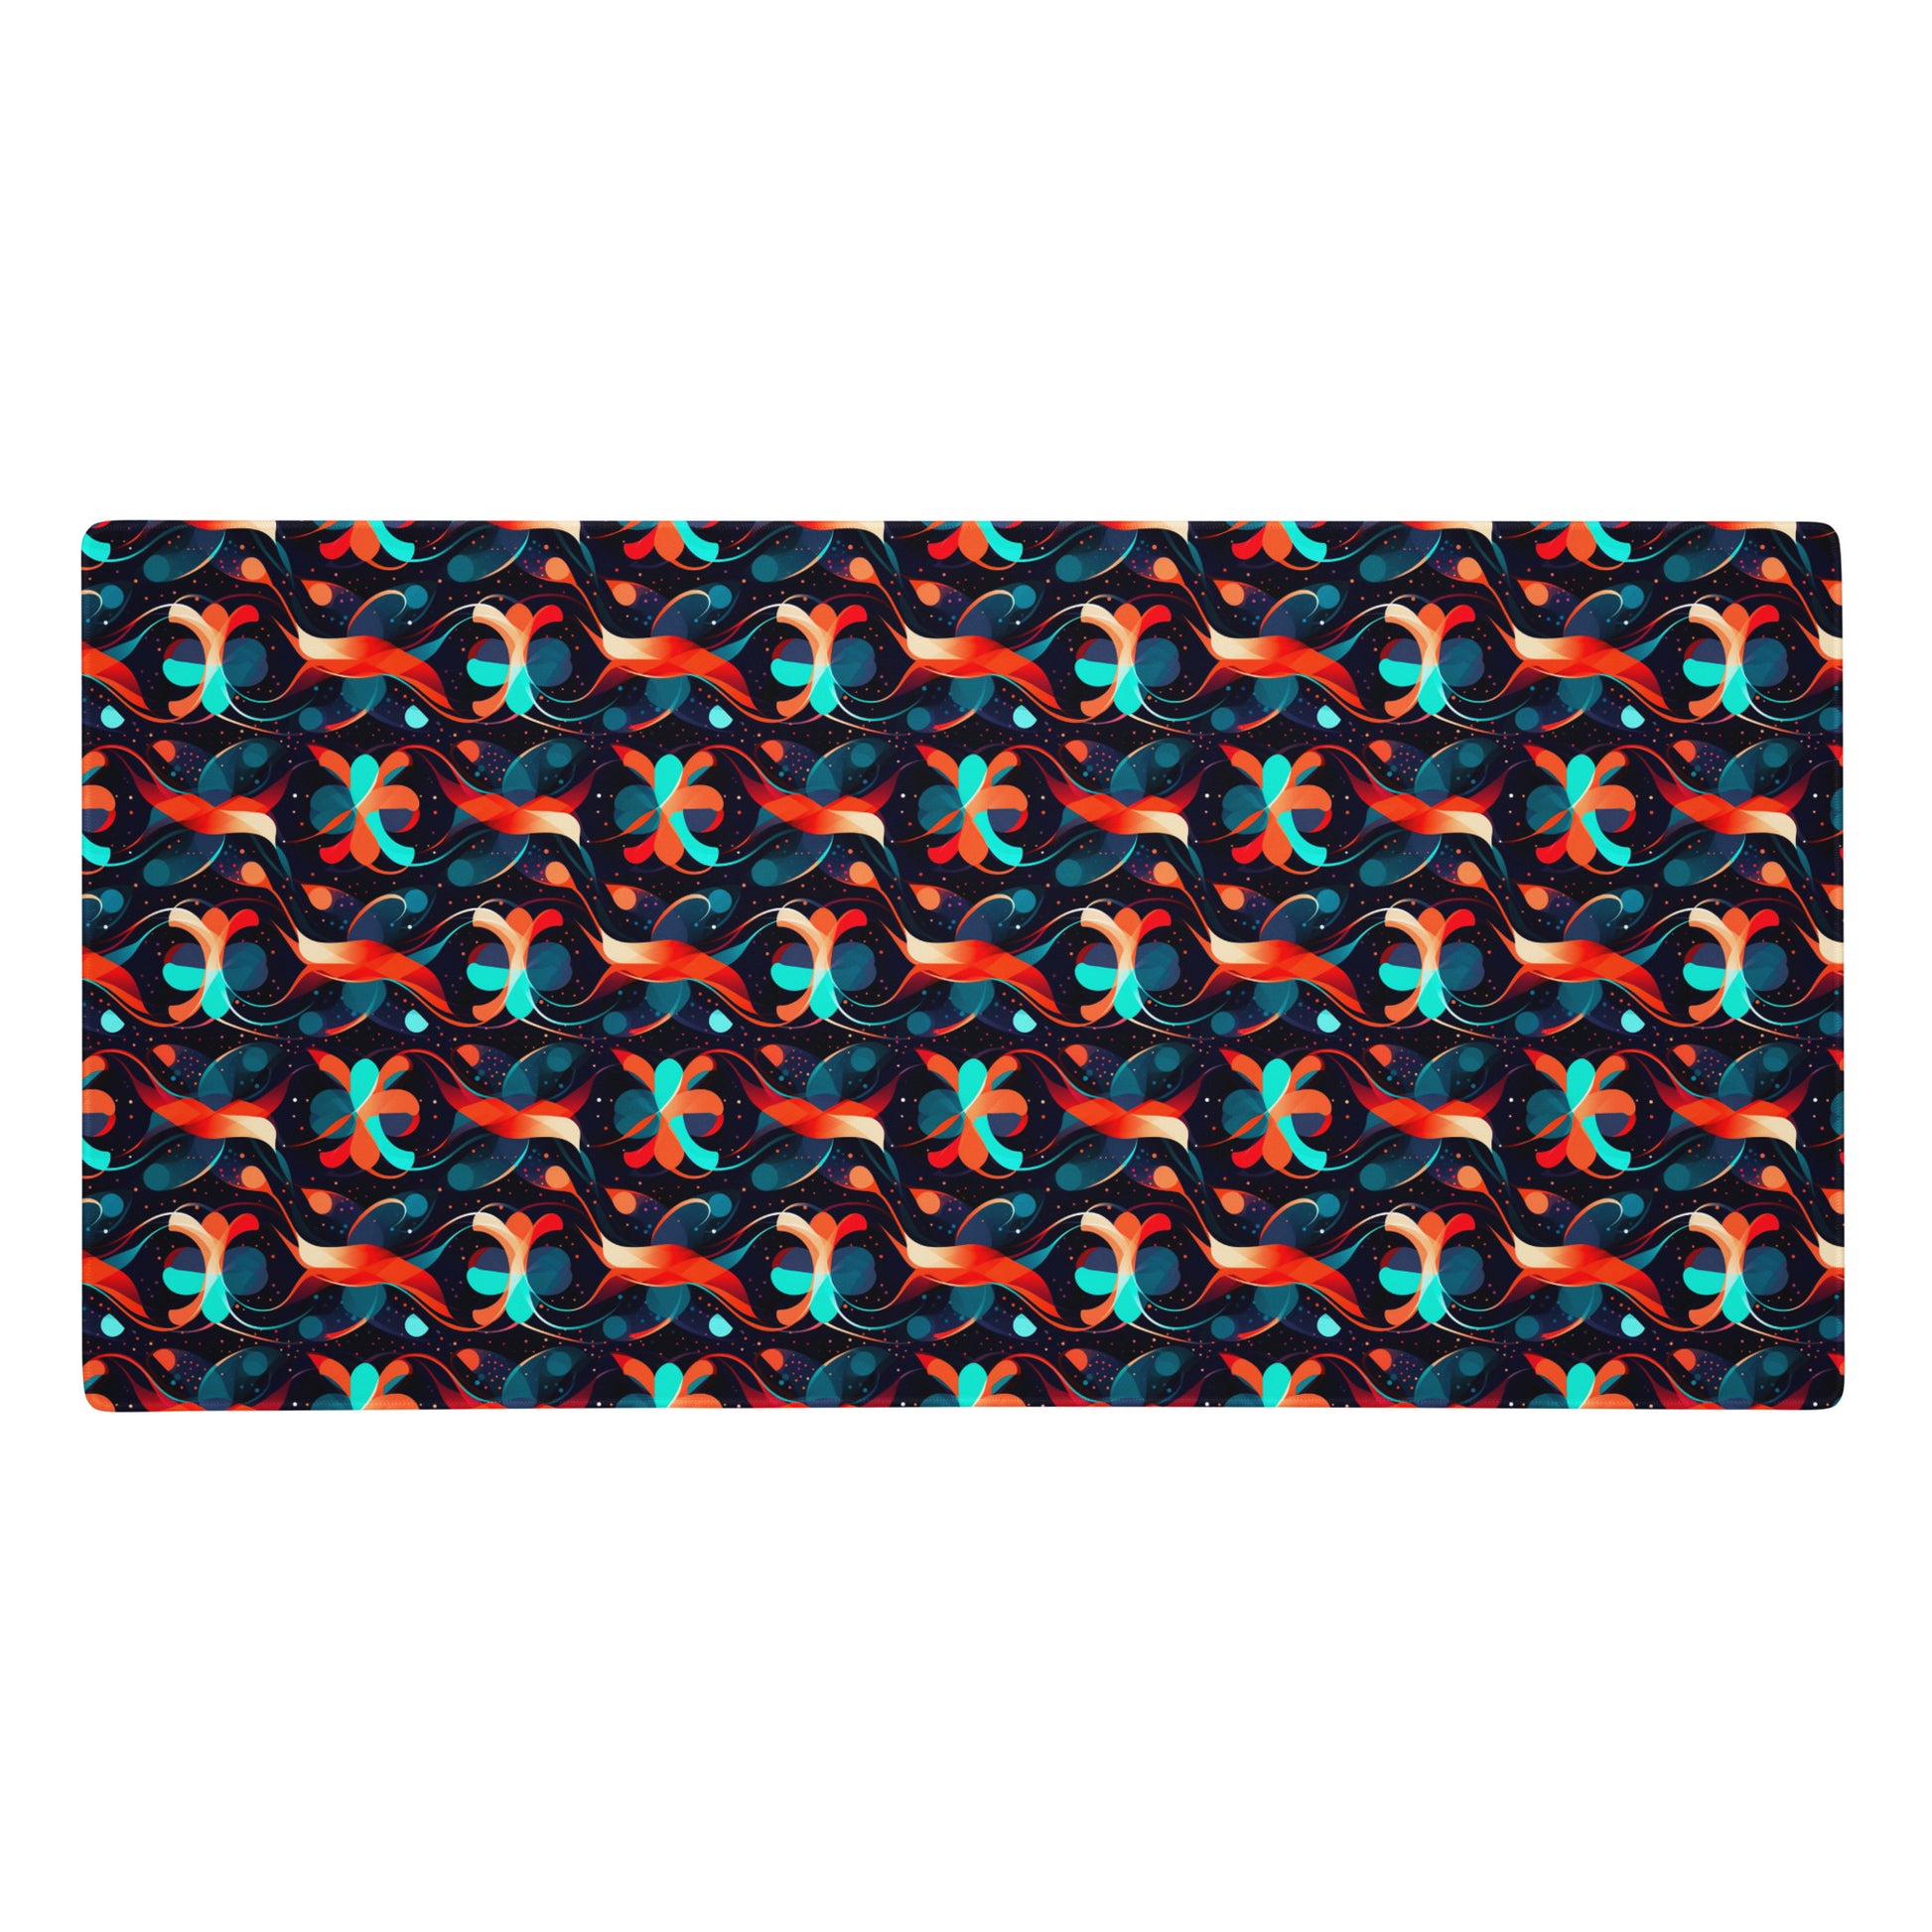 A 36" x 18" desk pad with a wavy orange and blue pattern.